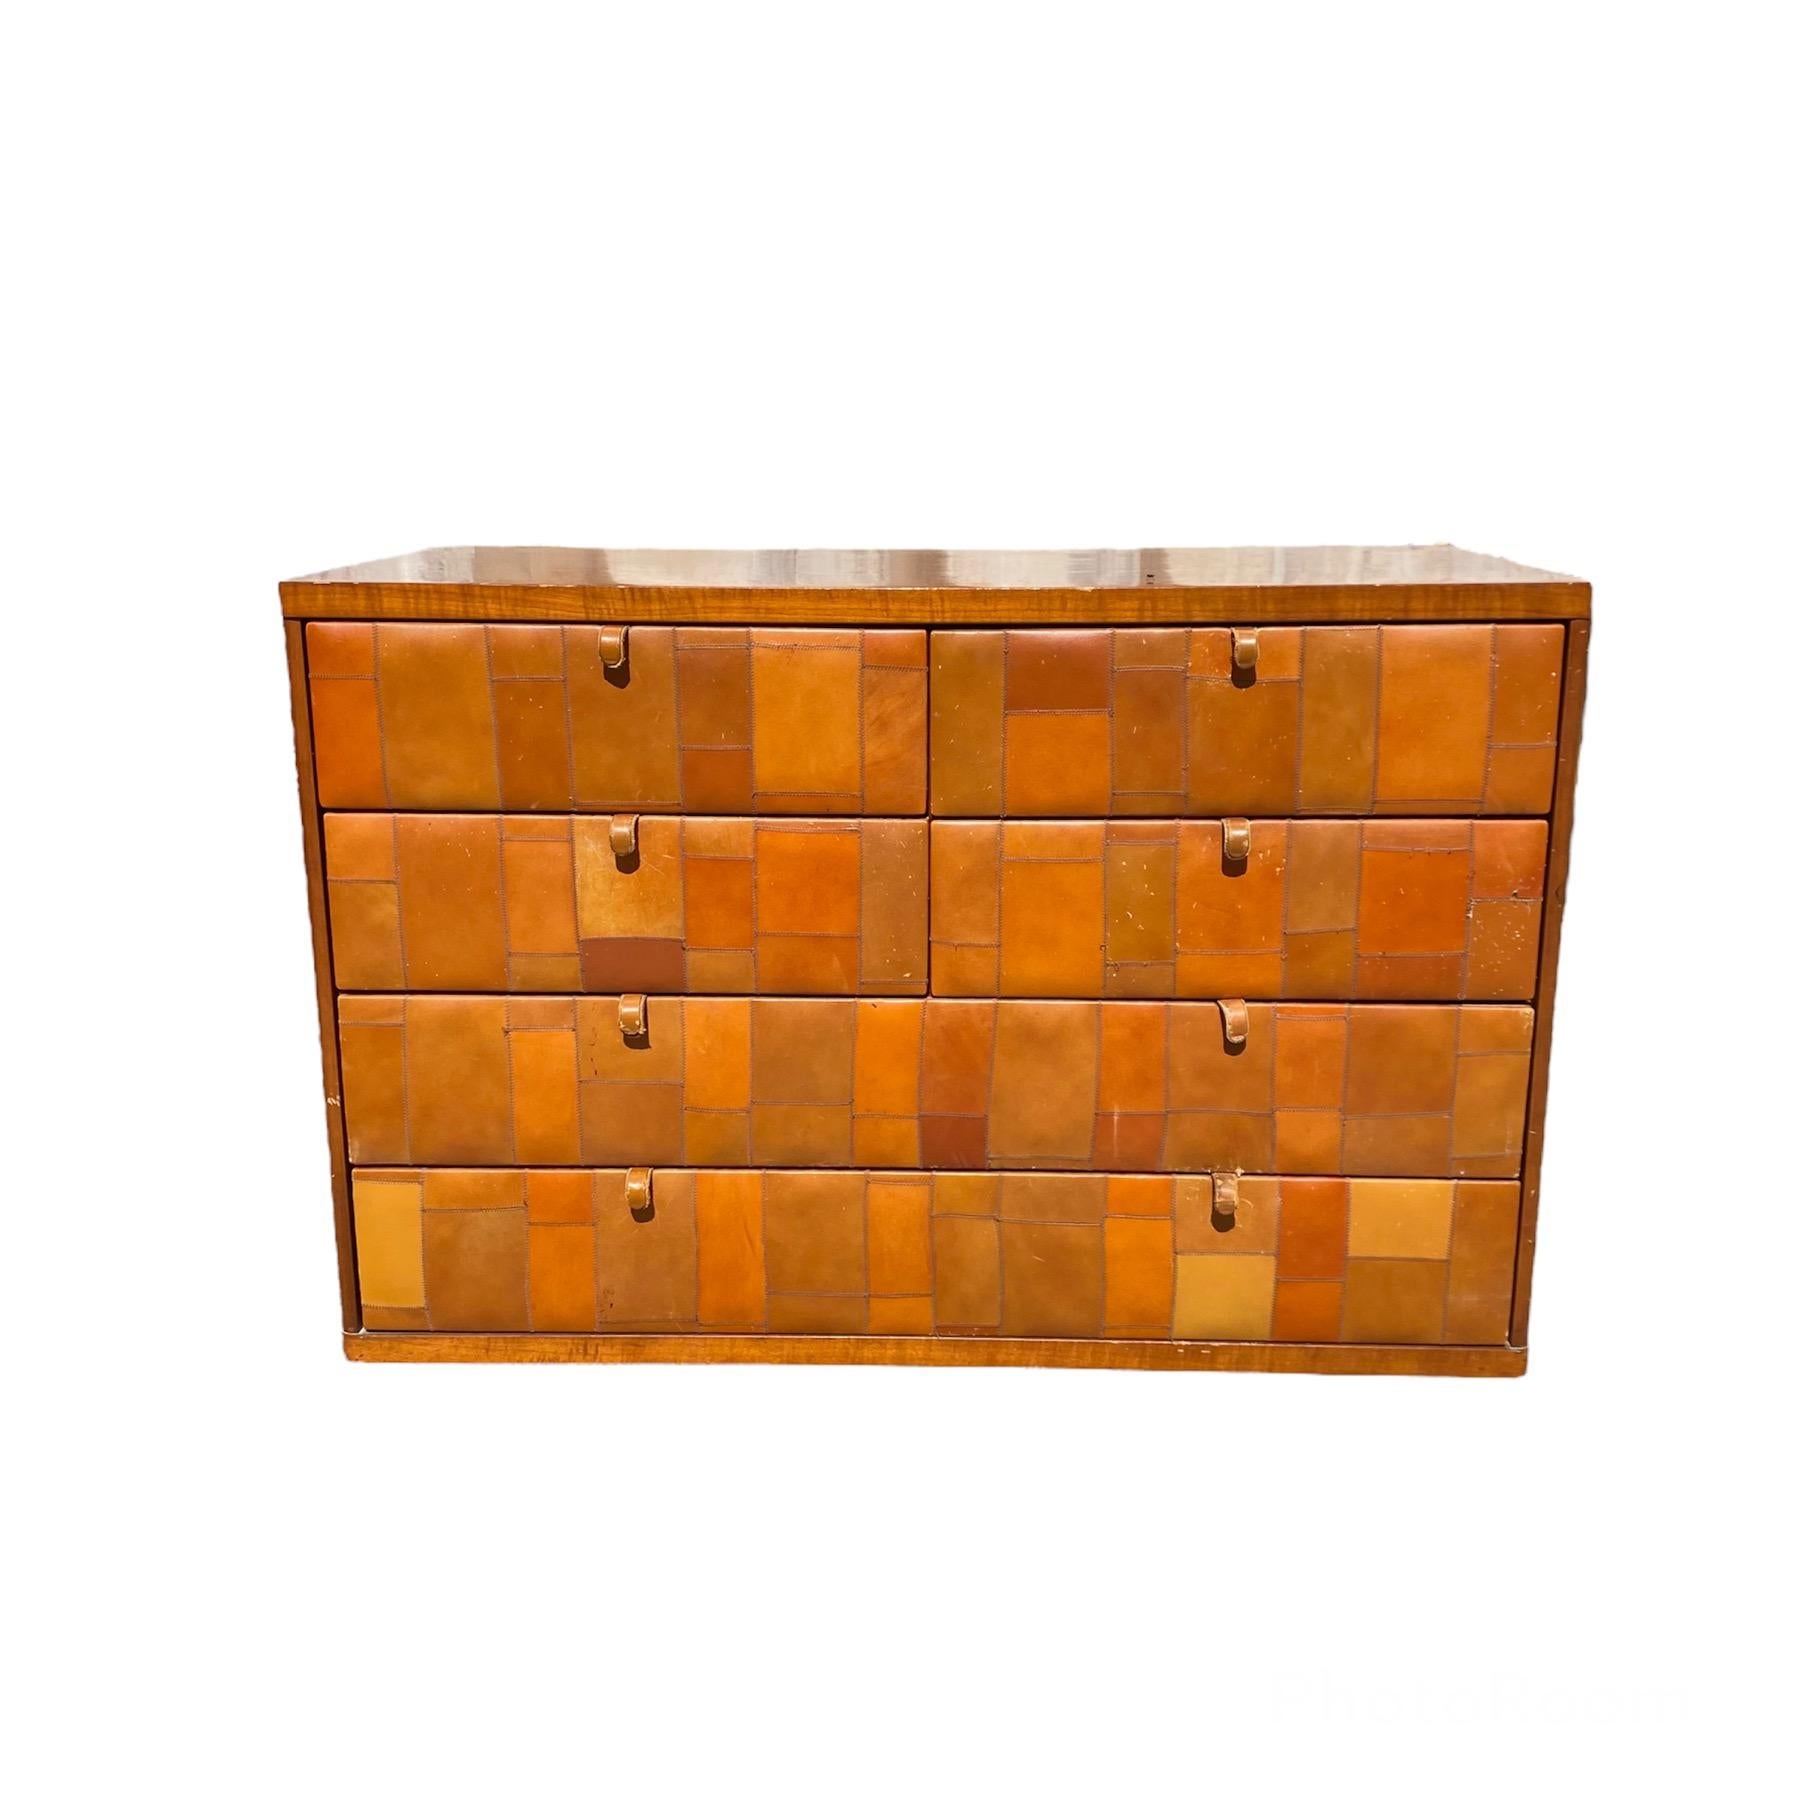 Incredible and very rare chest of drawers designed by Tito Agnoli for Caleido, a Poltrona Frau company in 1970.
The object is of incredible workmanship, with hand-sewn Pecary leather petchwork drawers, using the most precious leather on the market,